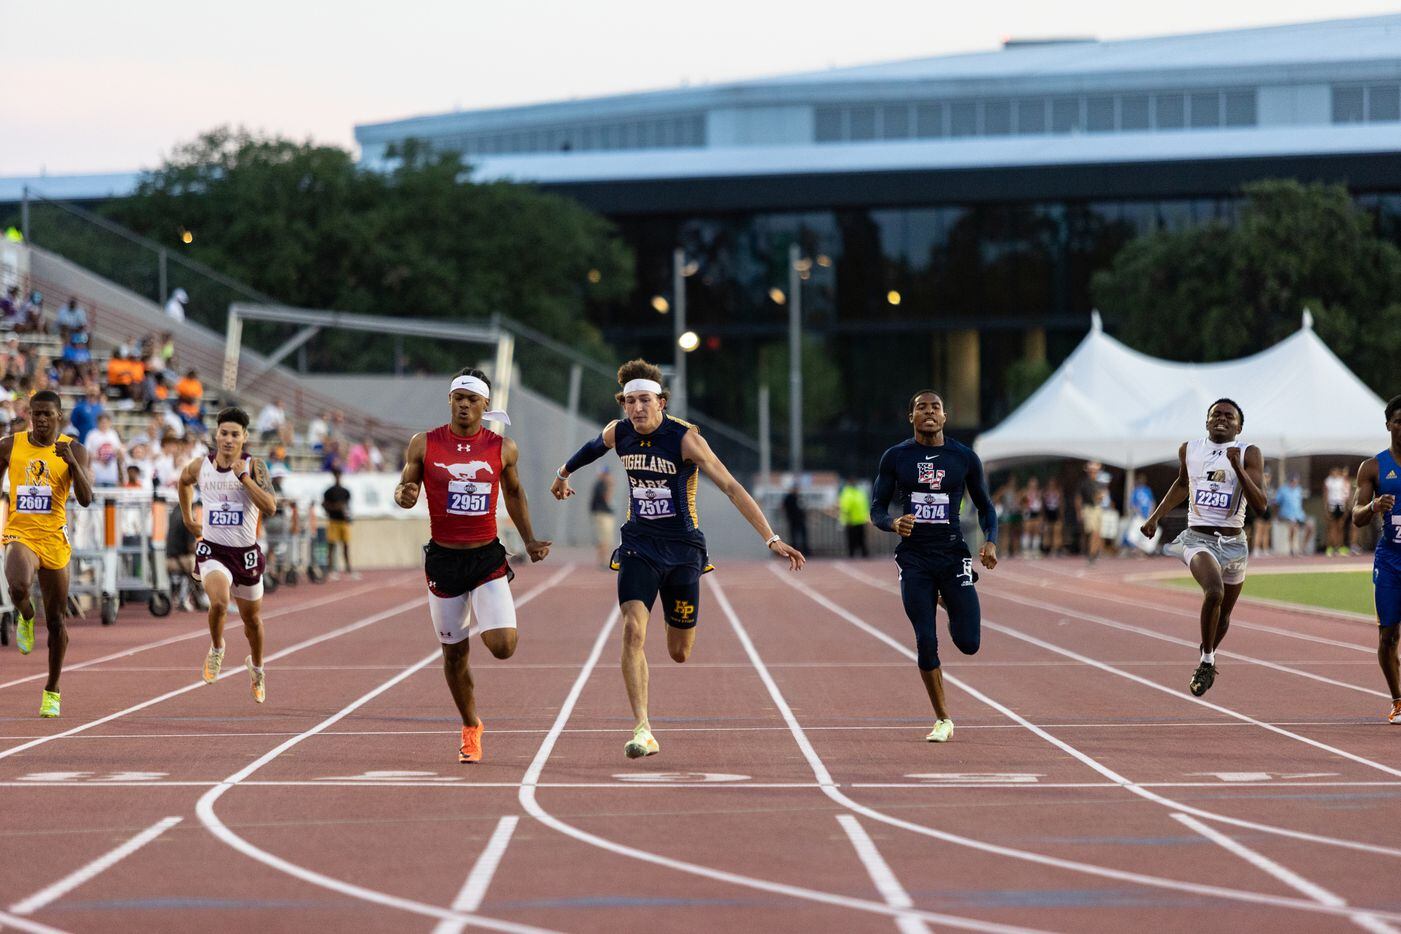 John Rutledge of Dallas Highland Park runs to the finish line during the boys’ 200m dash at...